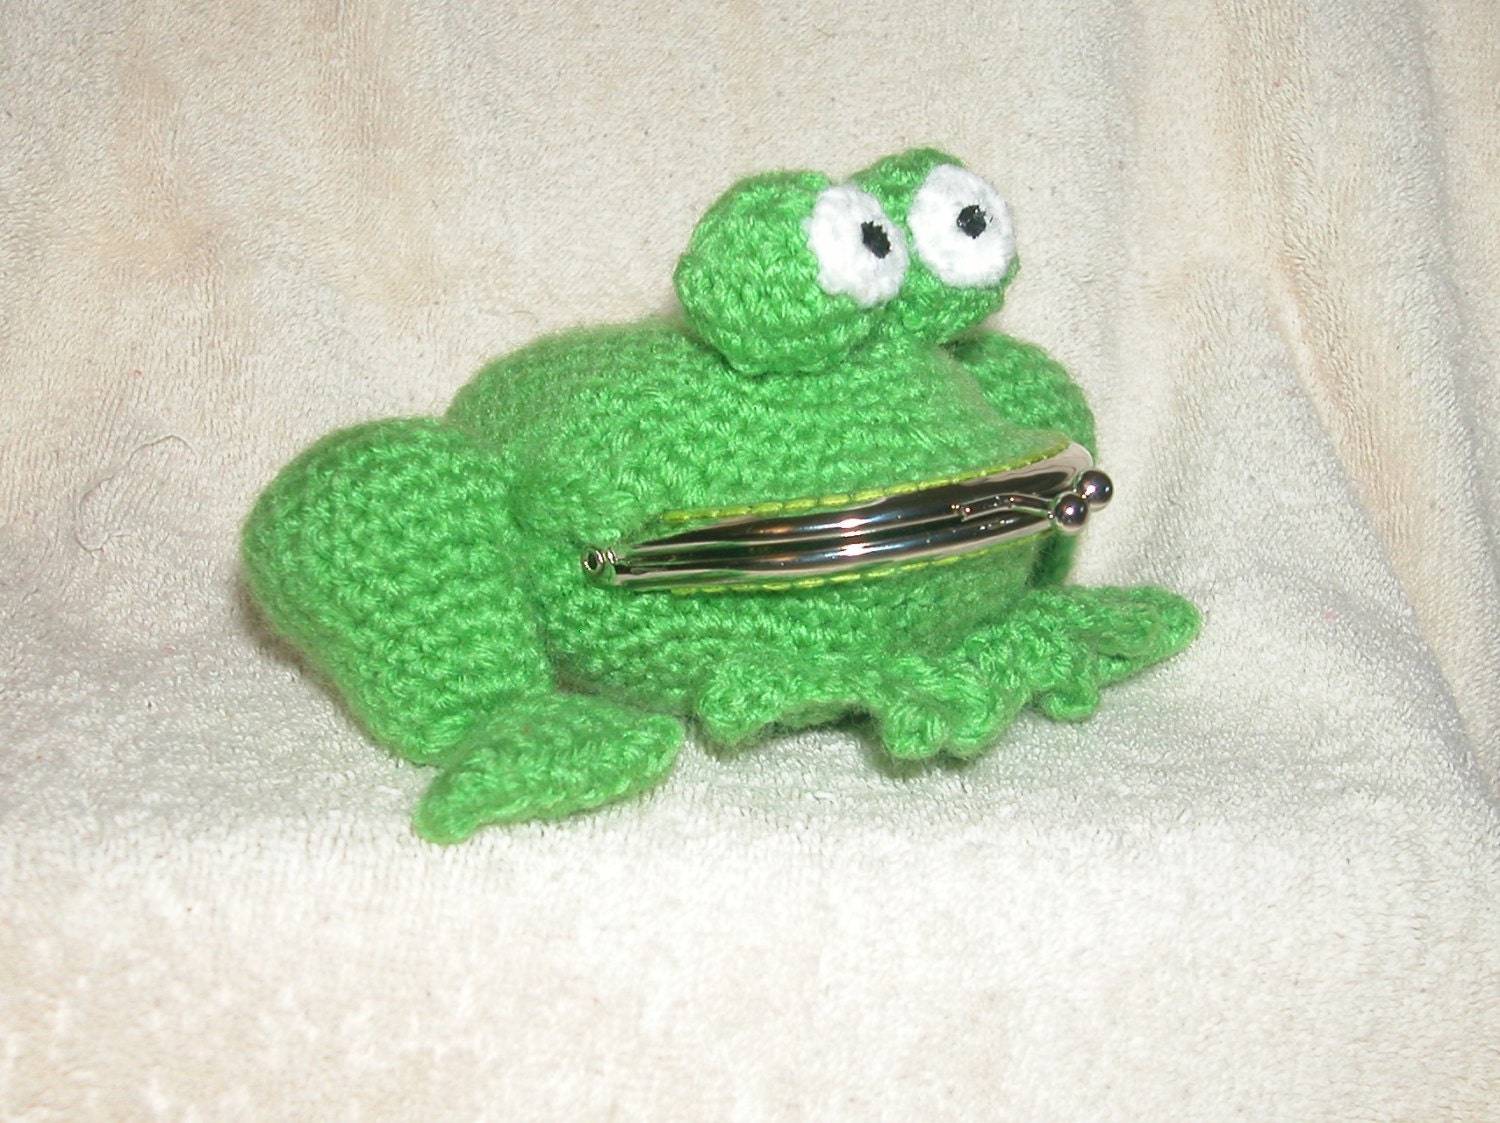 Crochet Frog coin purse Free US shipping by ShirleysToyBox on Etsy